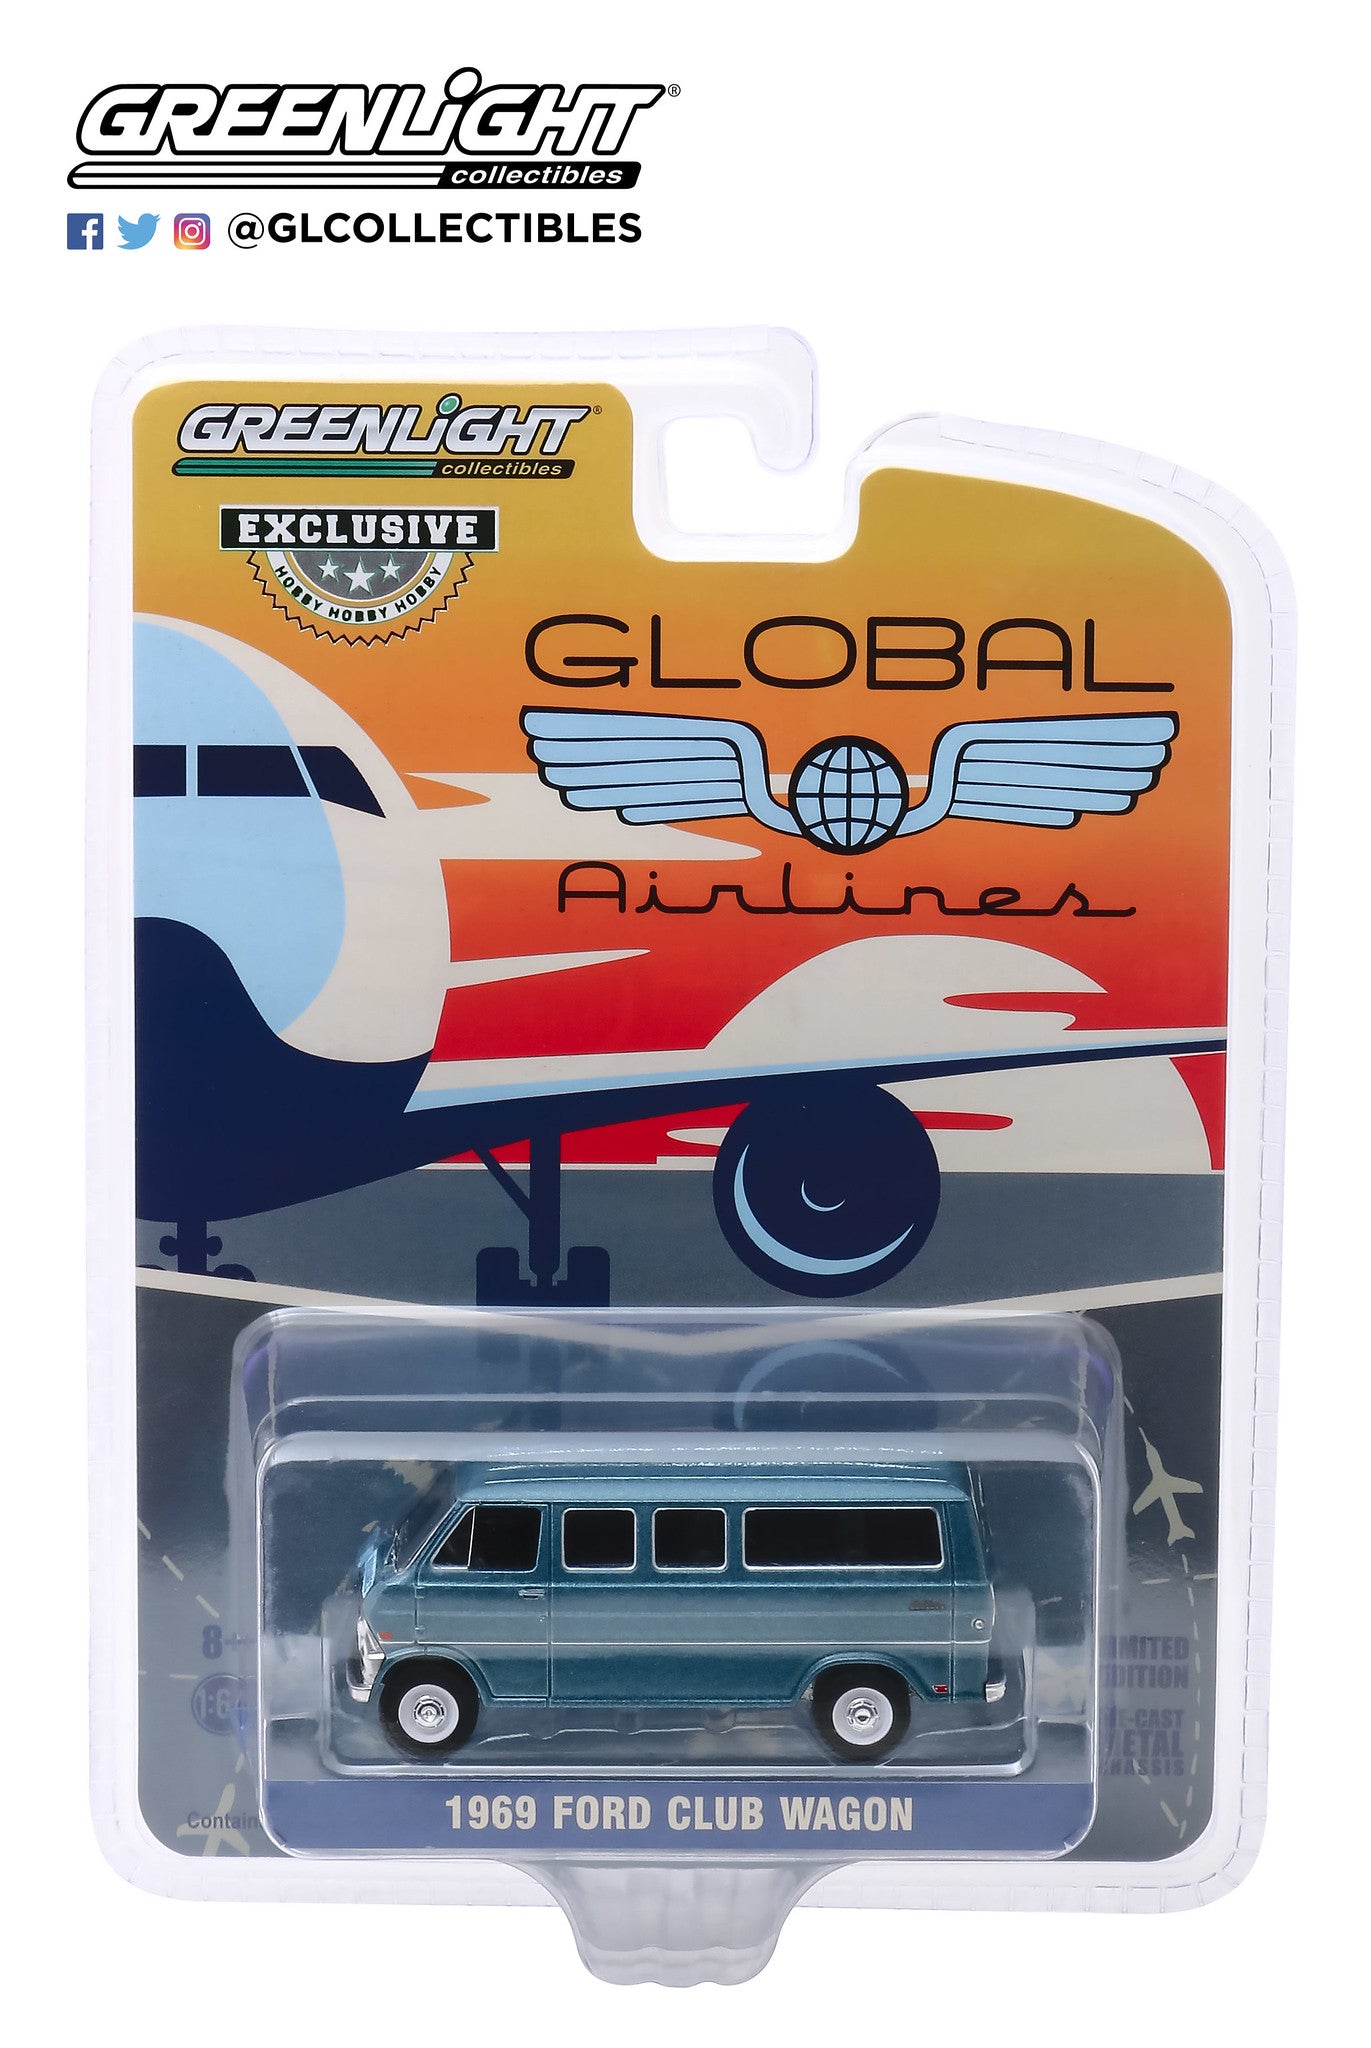 GreenLight 1:64 1969 Ford Club Wagon - Global Airlines (Hobby Exclusive) 30129